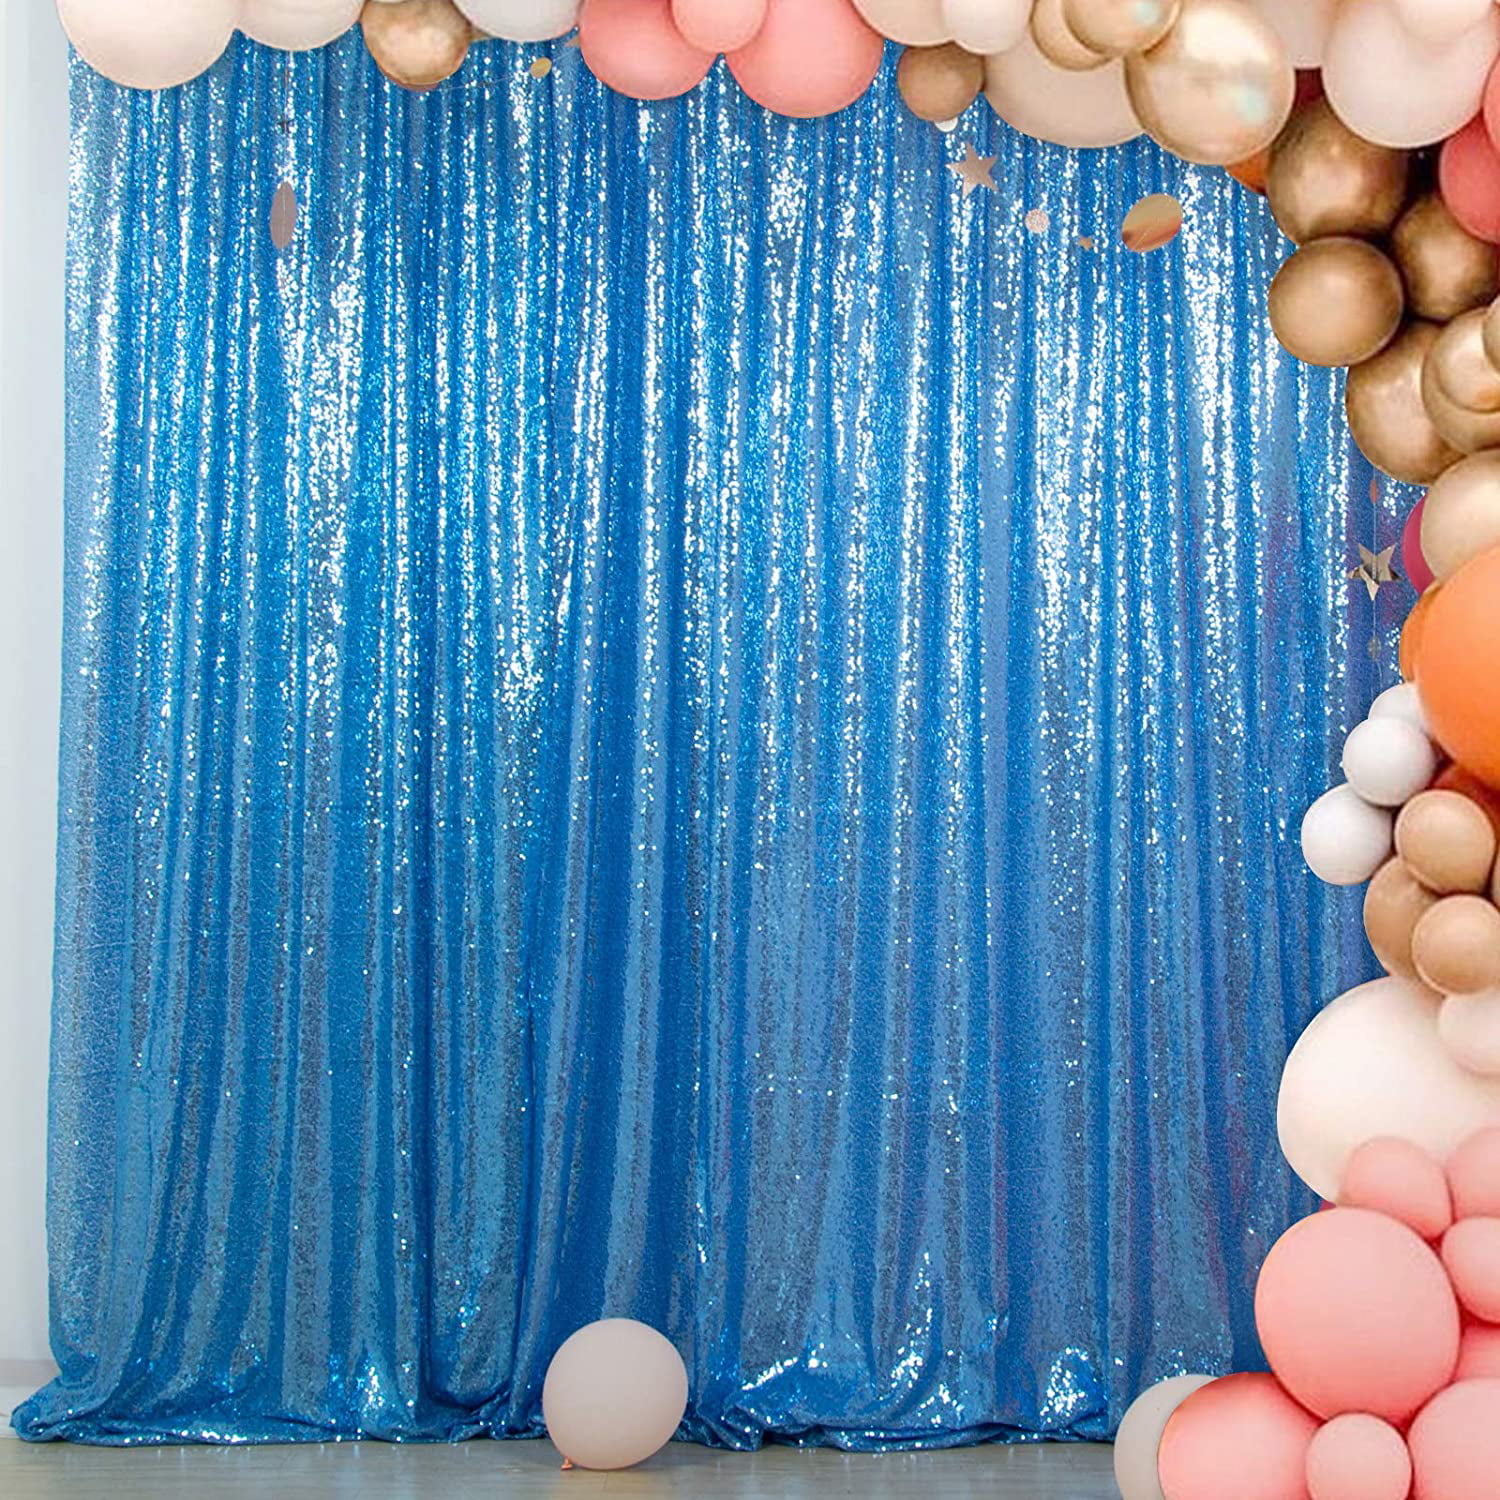 4FTX8FT Sparkly Chic Sequin Wedding Backdrop Photography Backdrop Sequin Curtain 